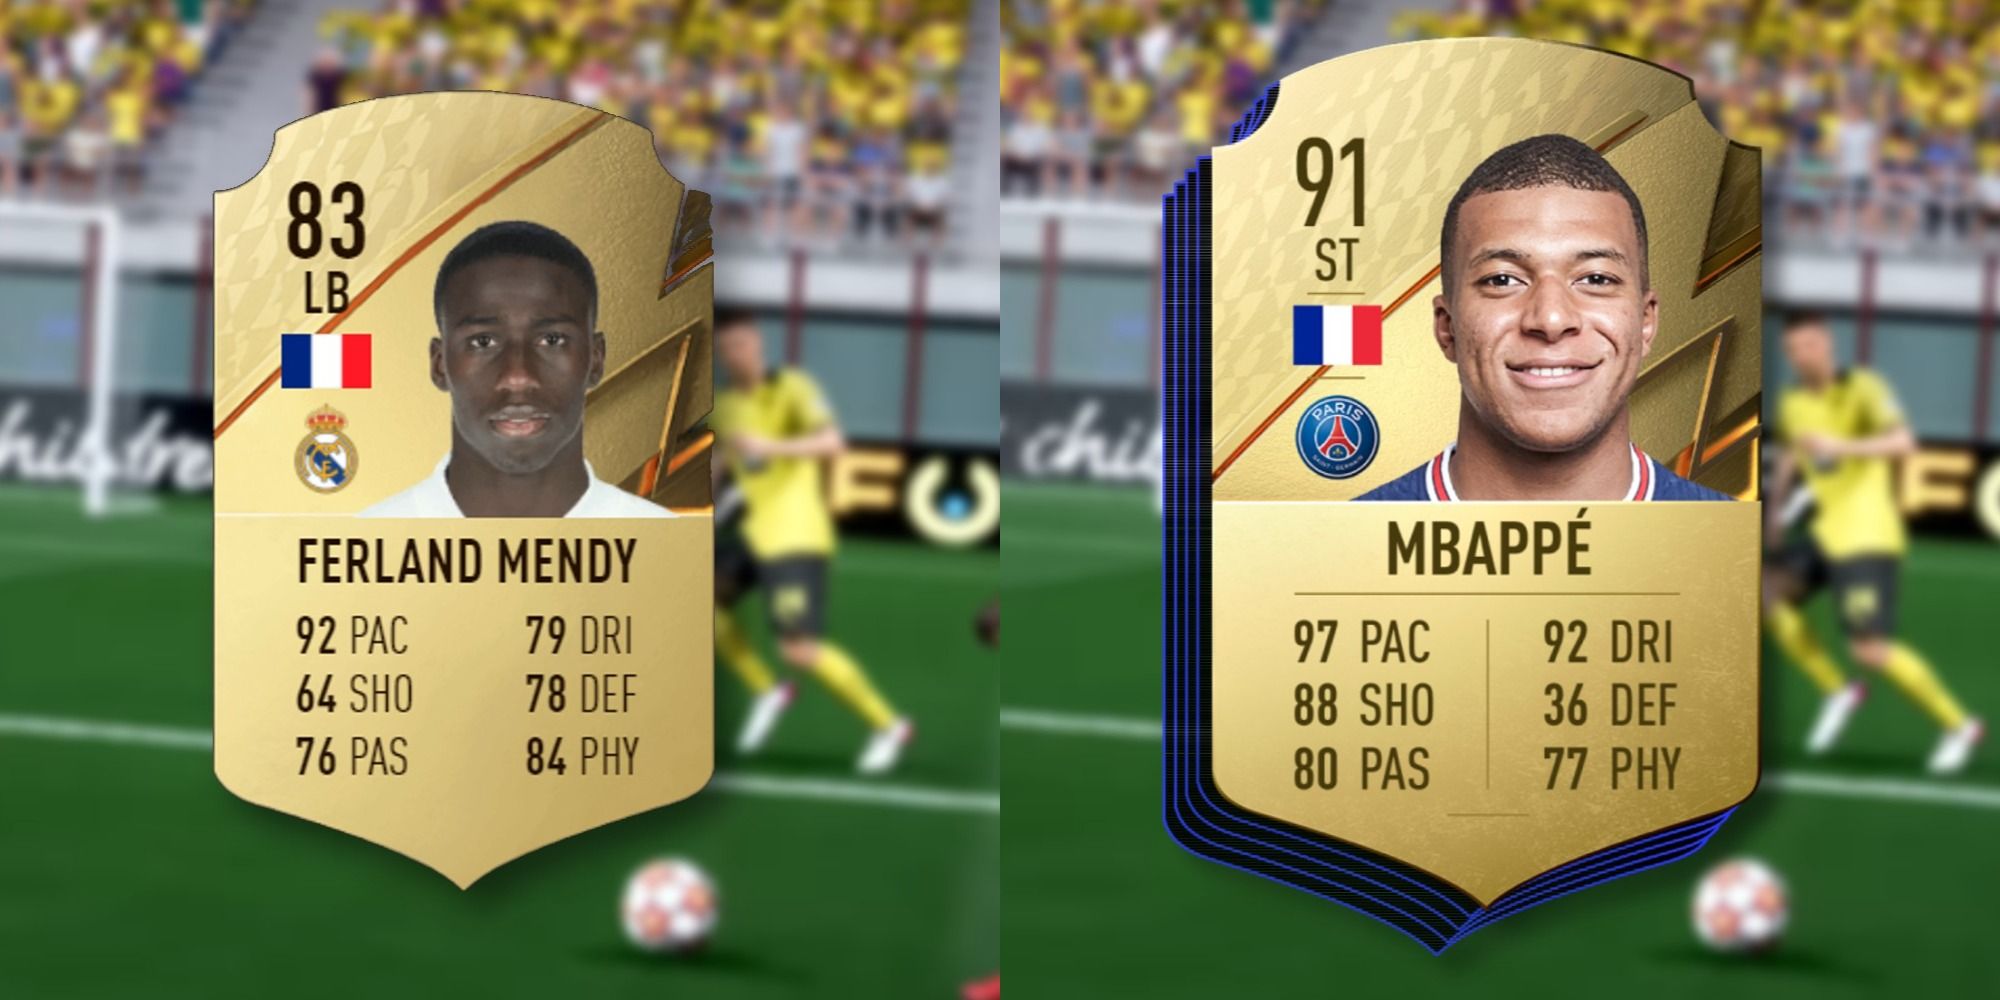 ferland mendy and mbappe fifa 22